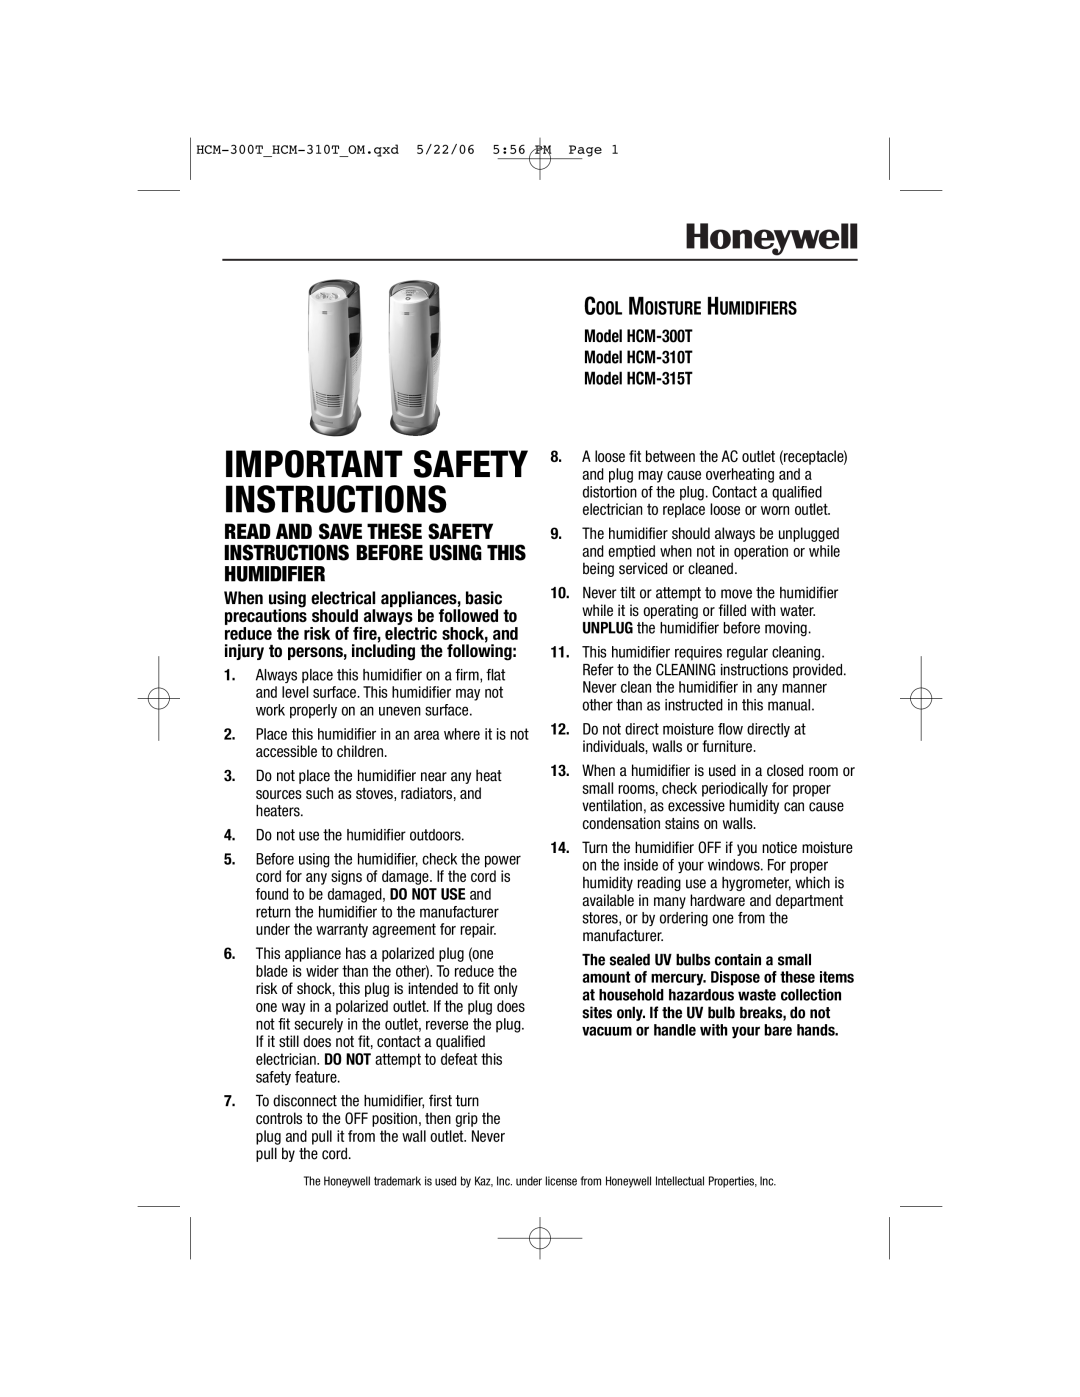 Honeywell important safety instructions Model HCM-300T Model HCM-310T Model HCM-315T, Important Safety Instructions 